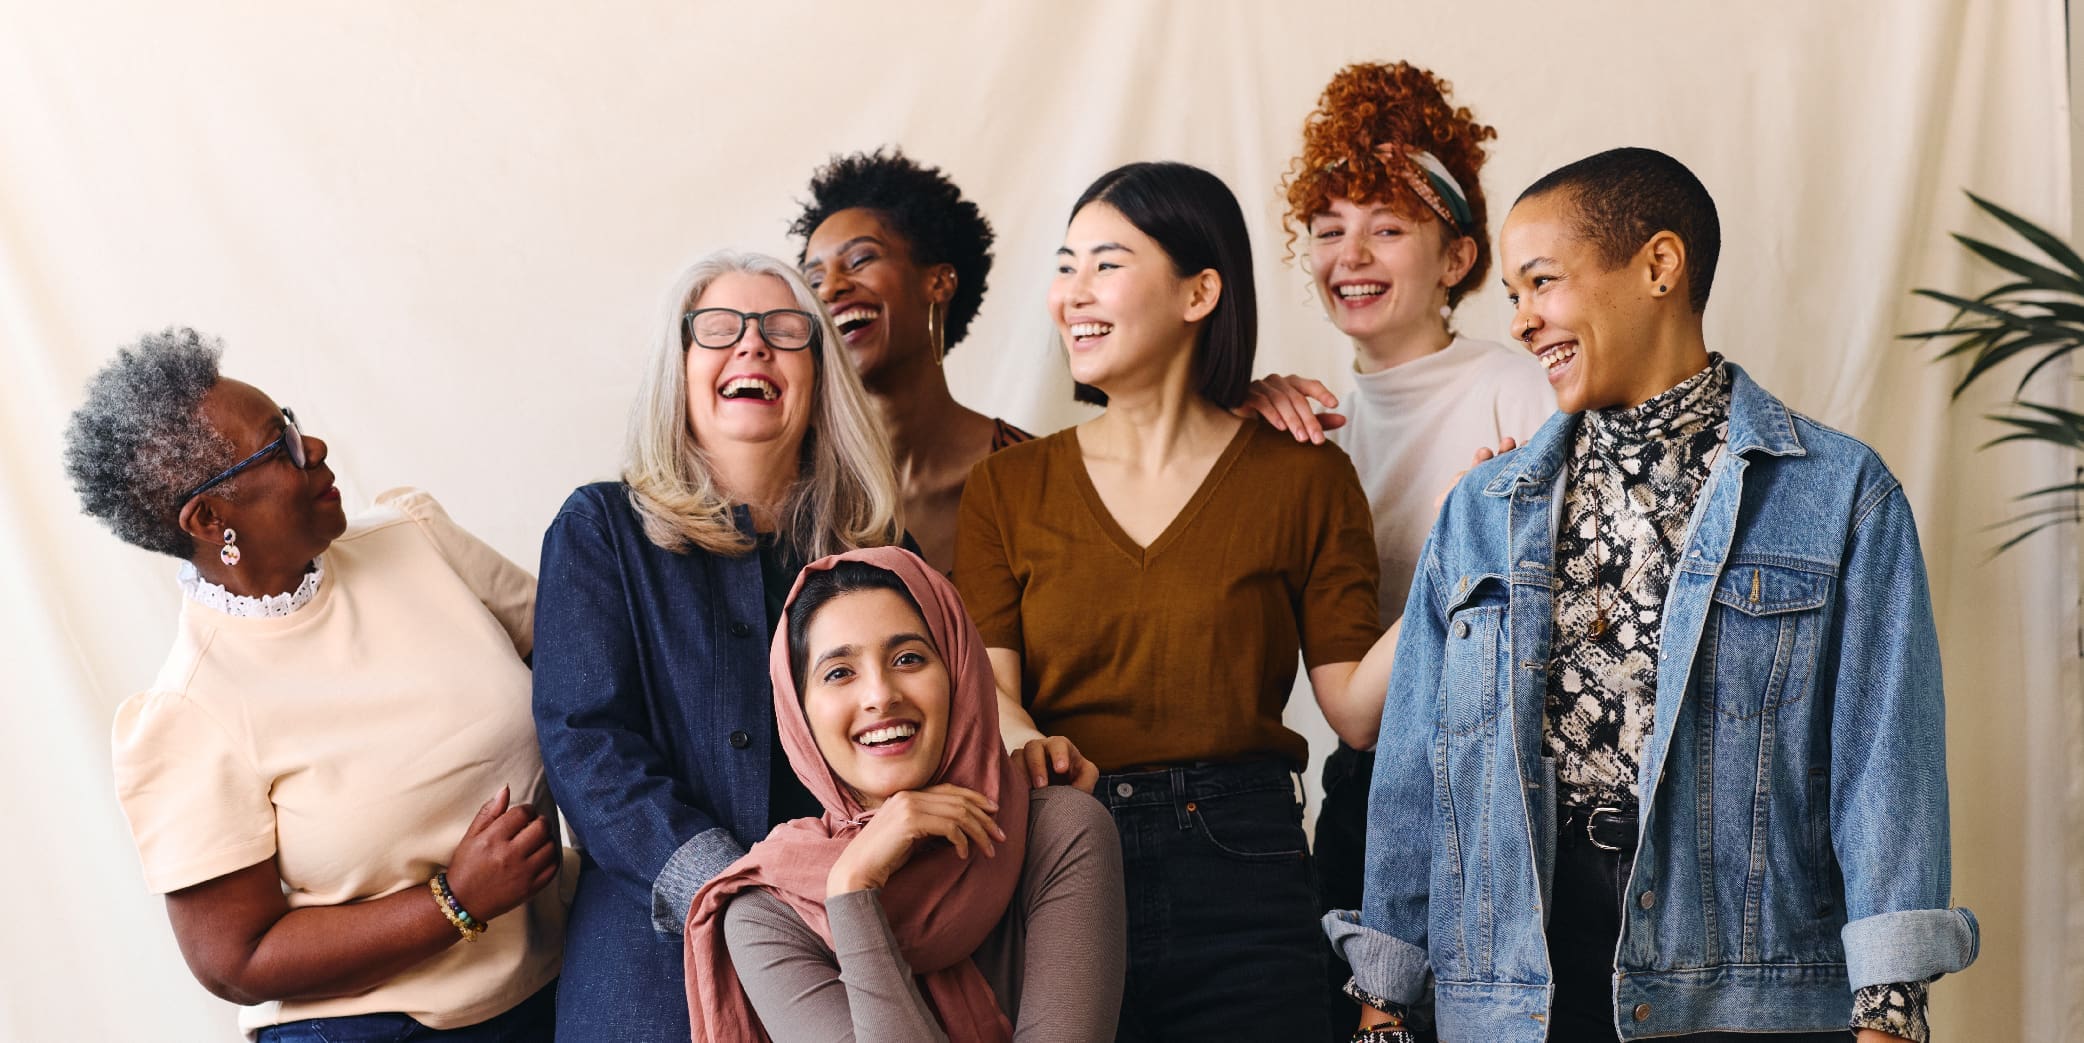 Group of happy diverse women